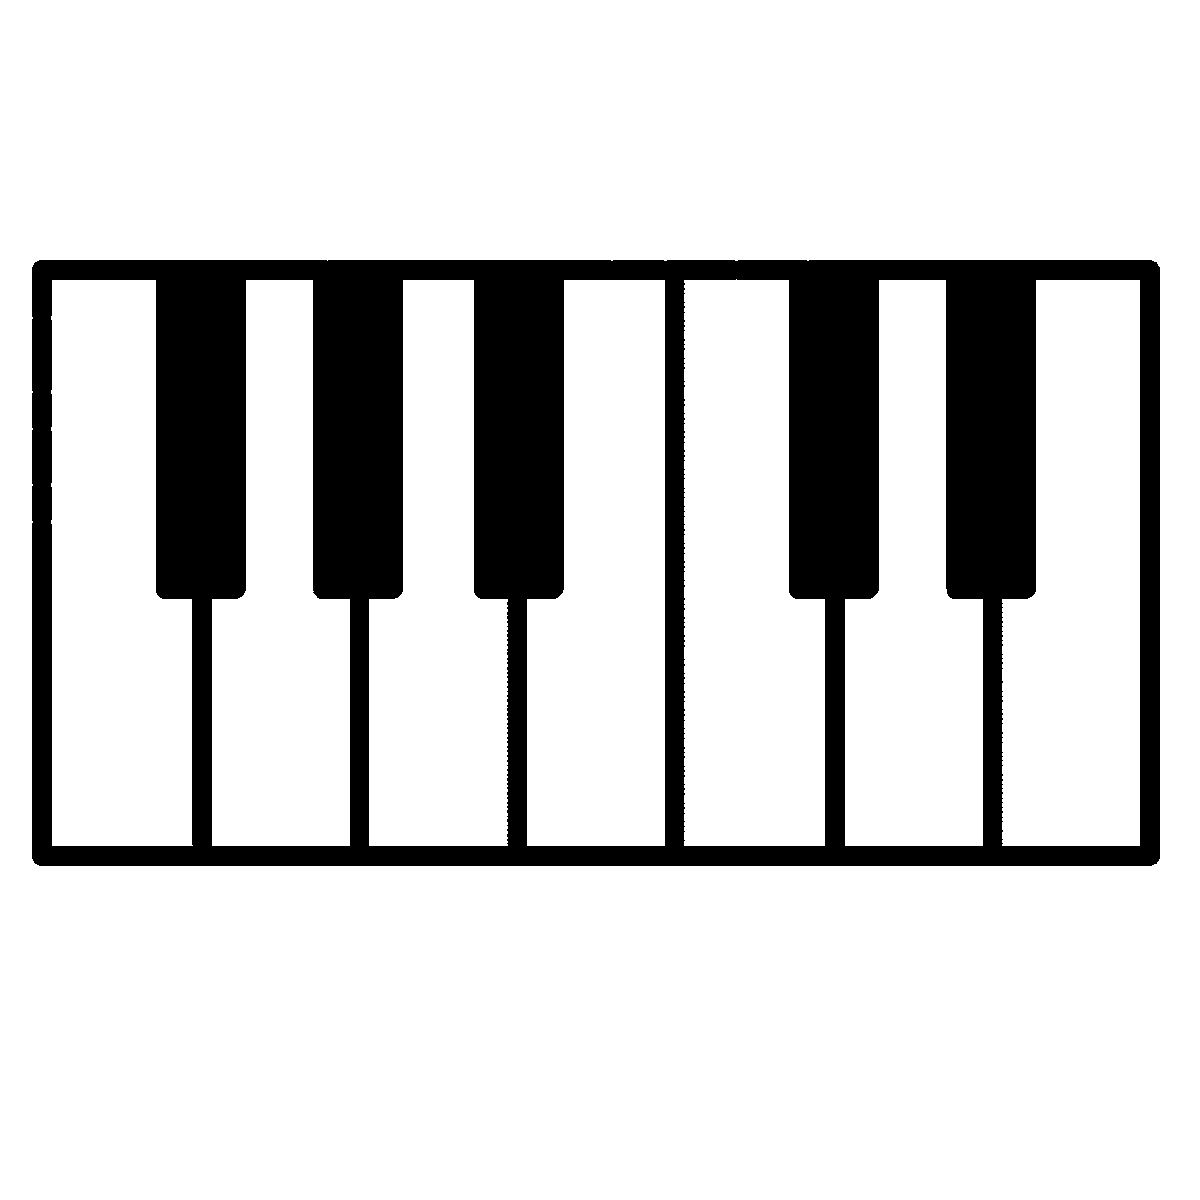 Upright piano clipart free cl